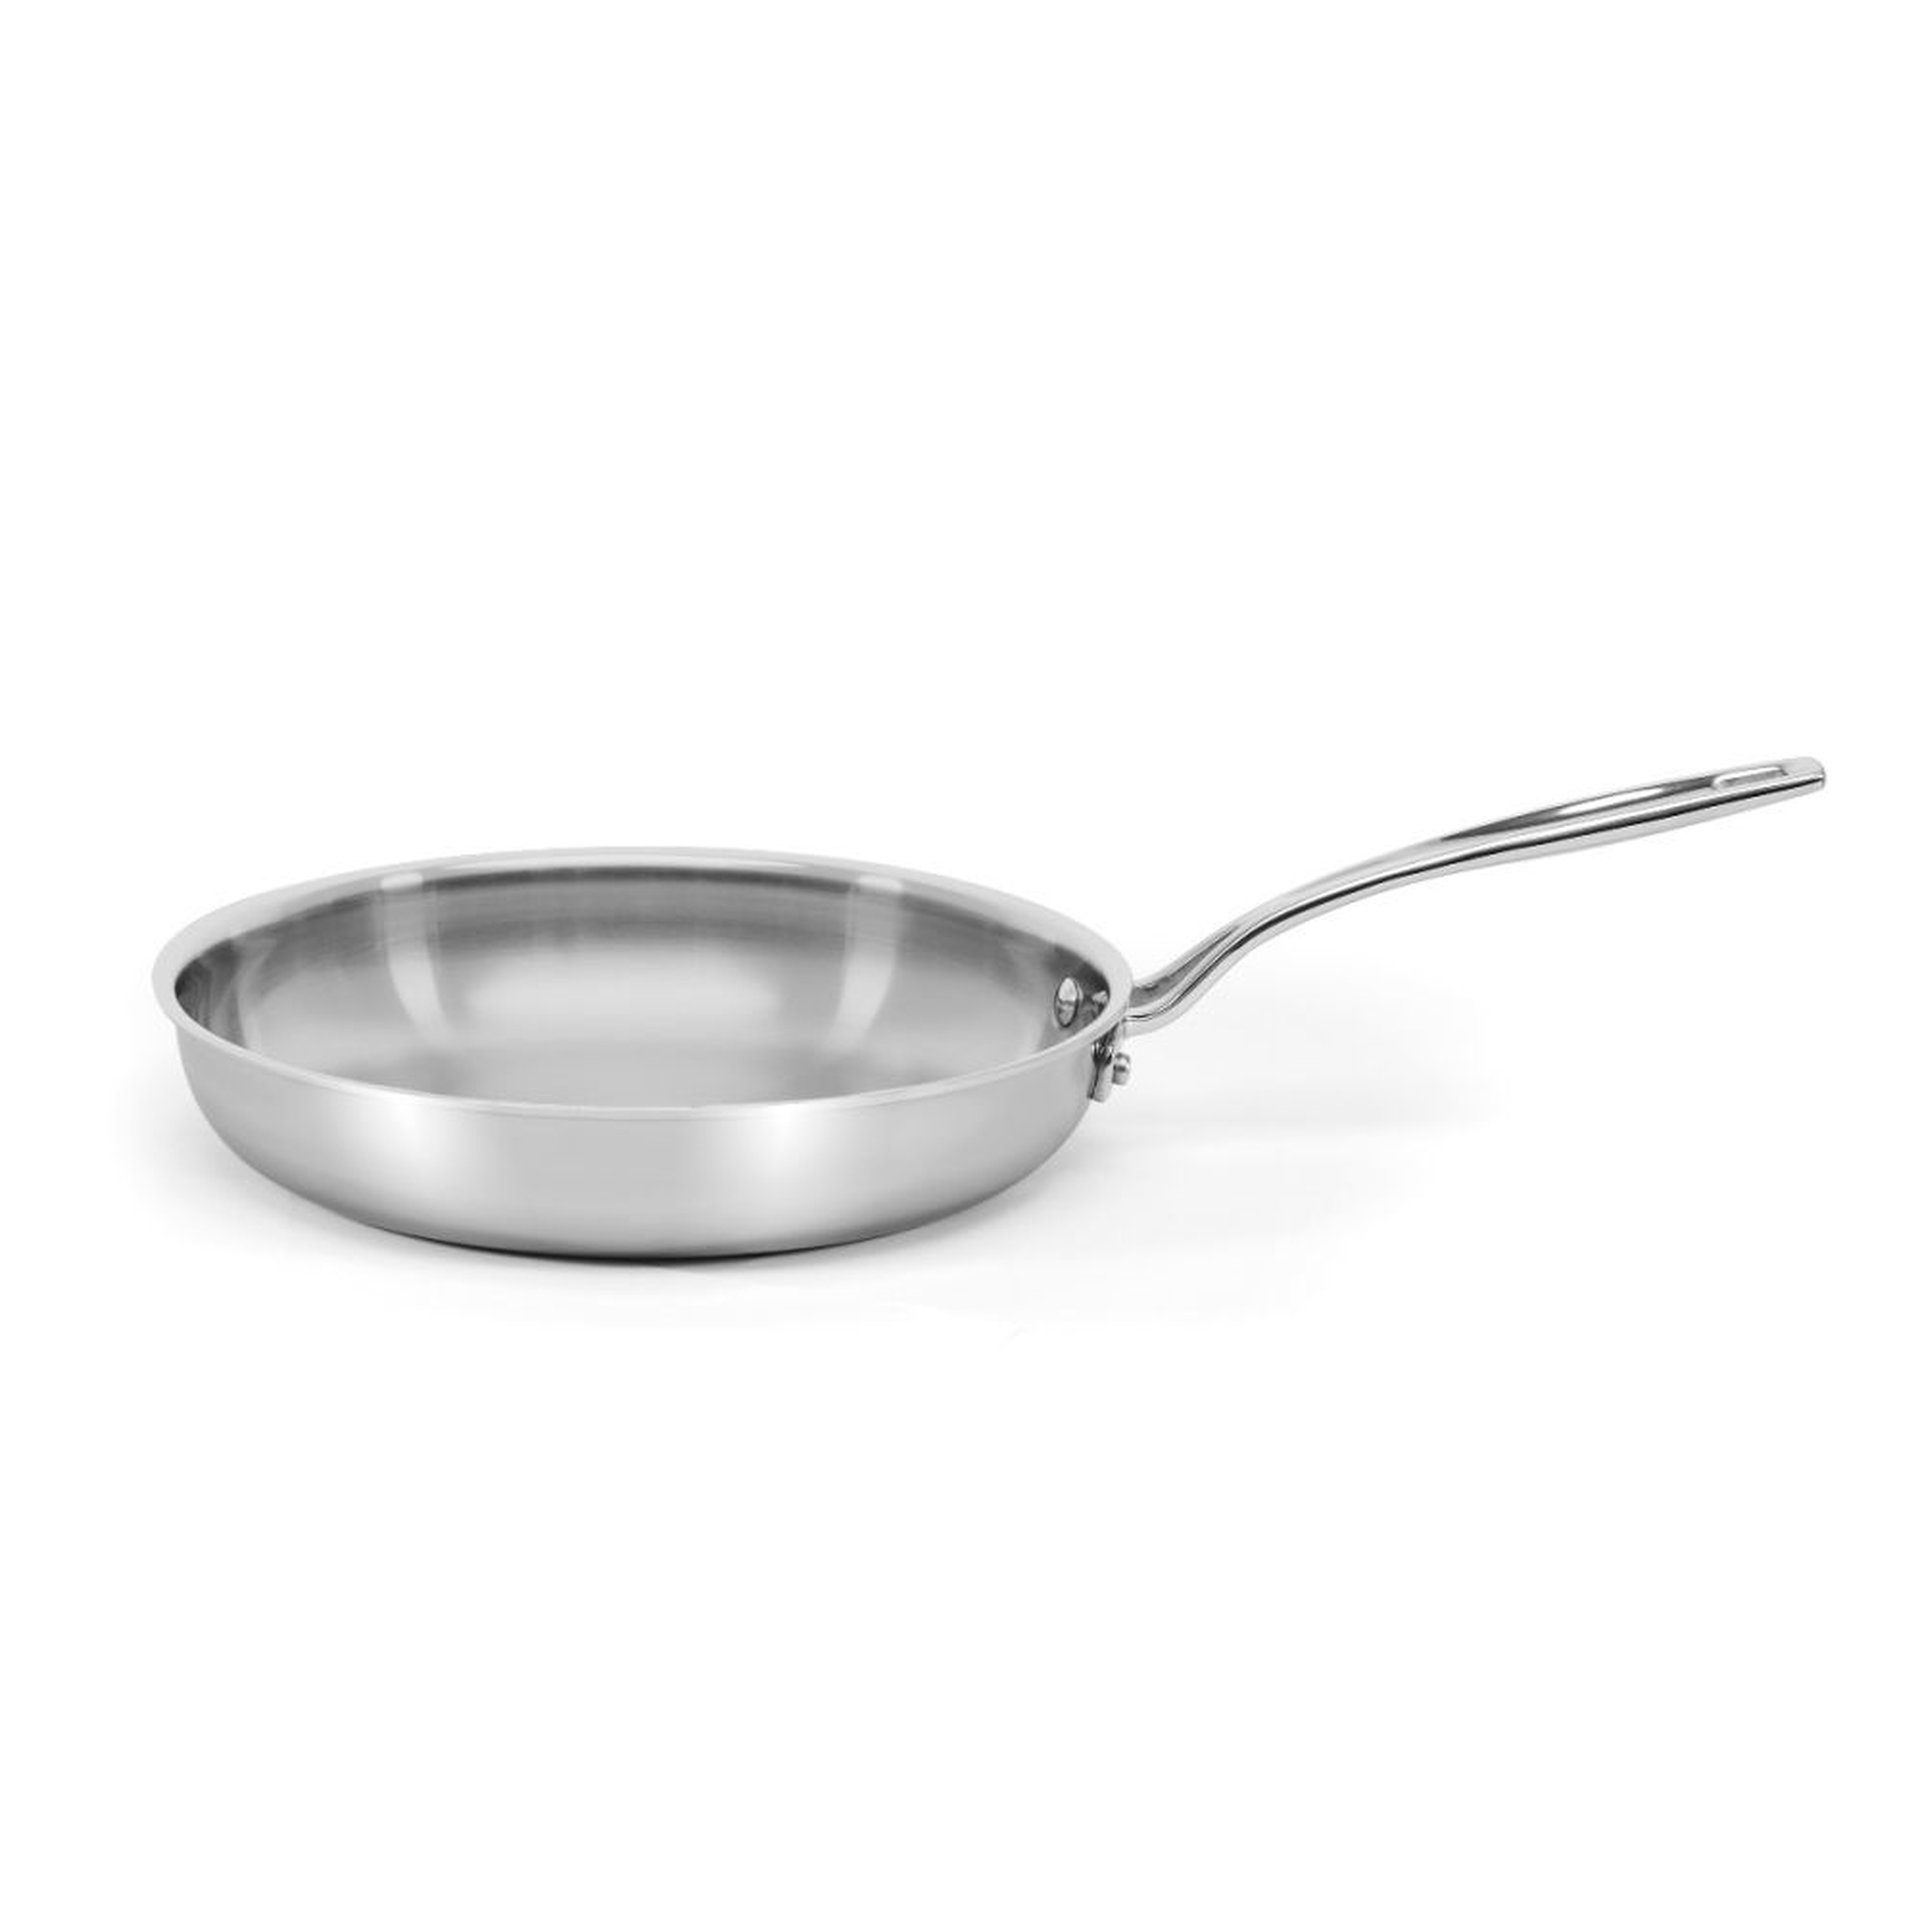 KitchenAid 5-Ply Clad Stainless Steel Induction Frying Pan, 10